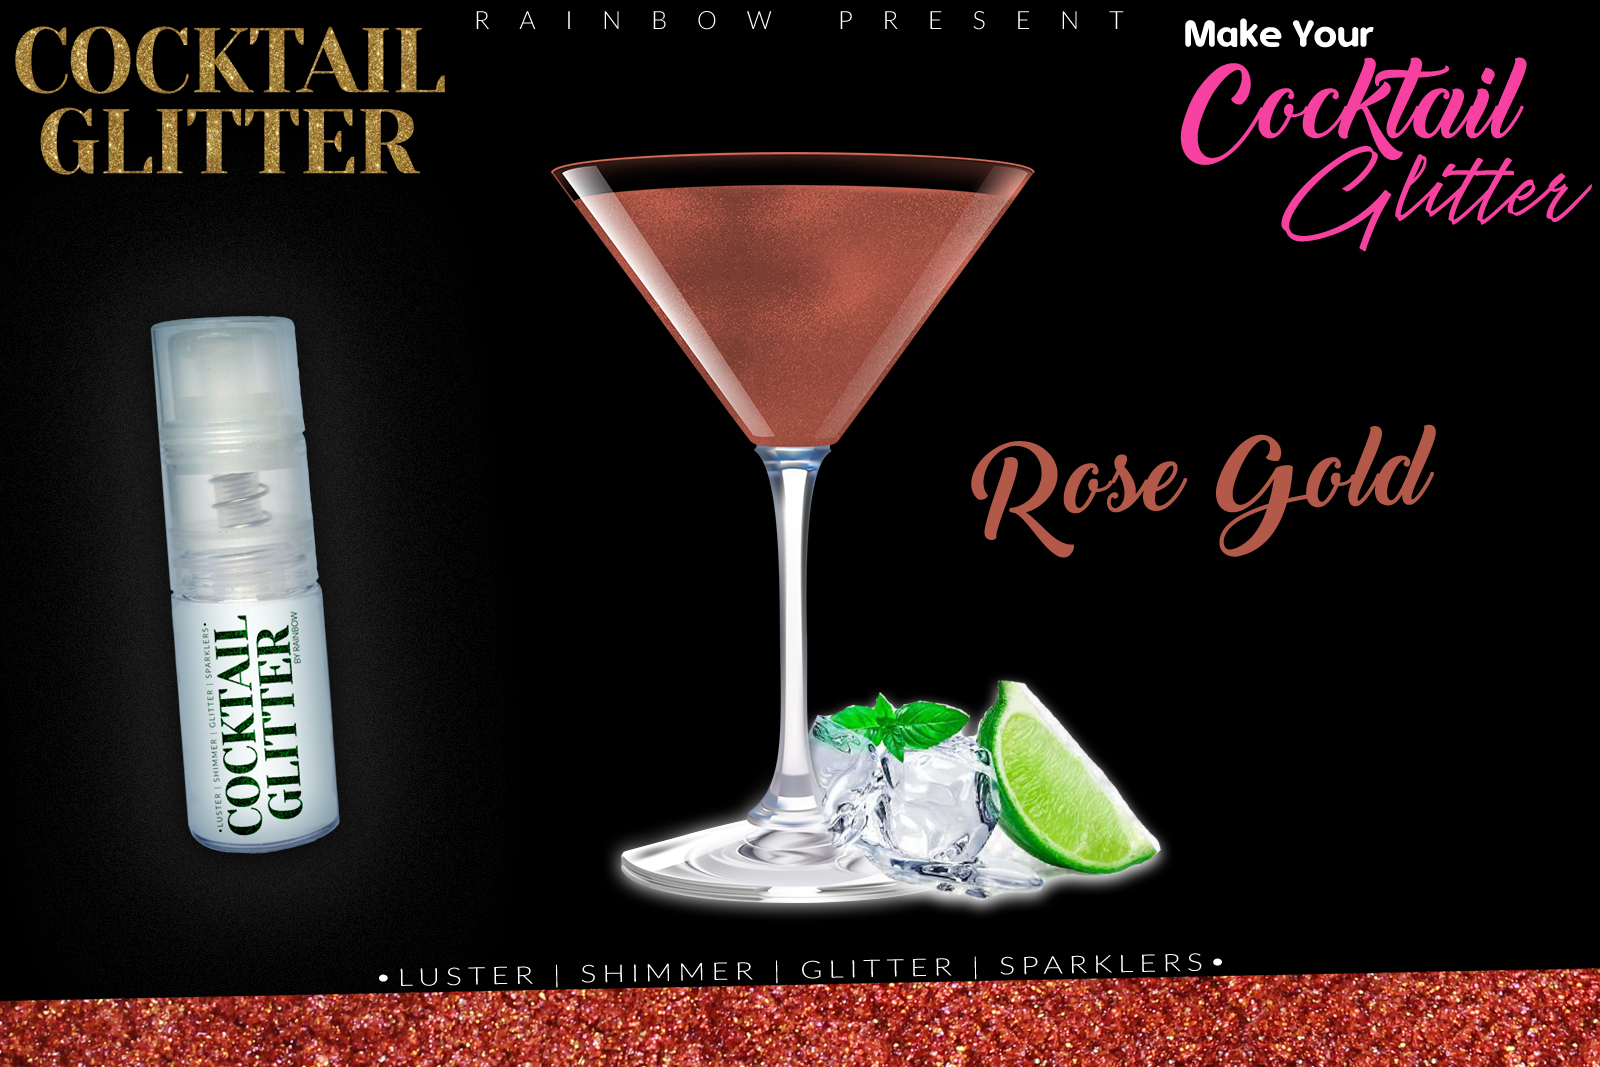 Glitzy Cocktail Glitter and Sparkling Effect | Edible | Rose Gold 